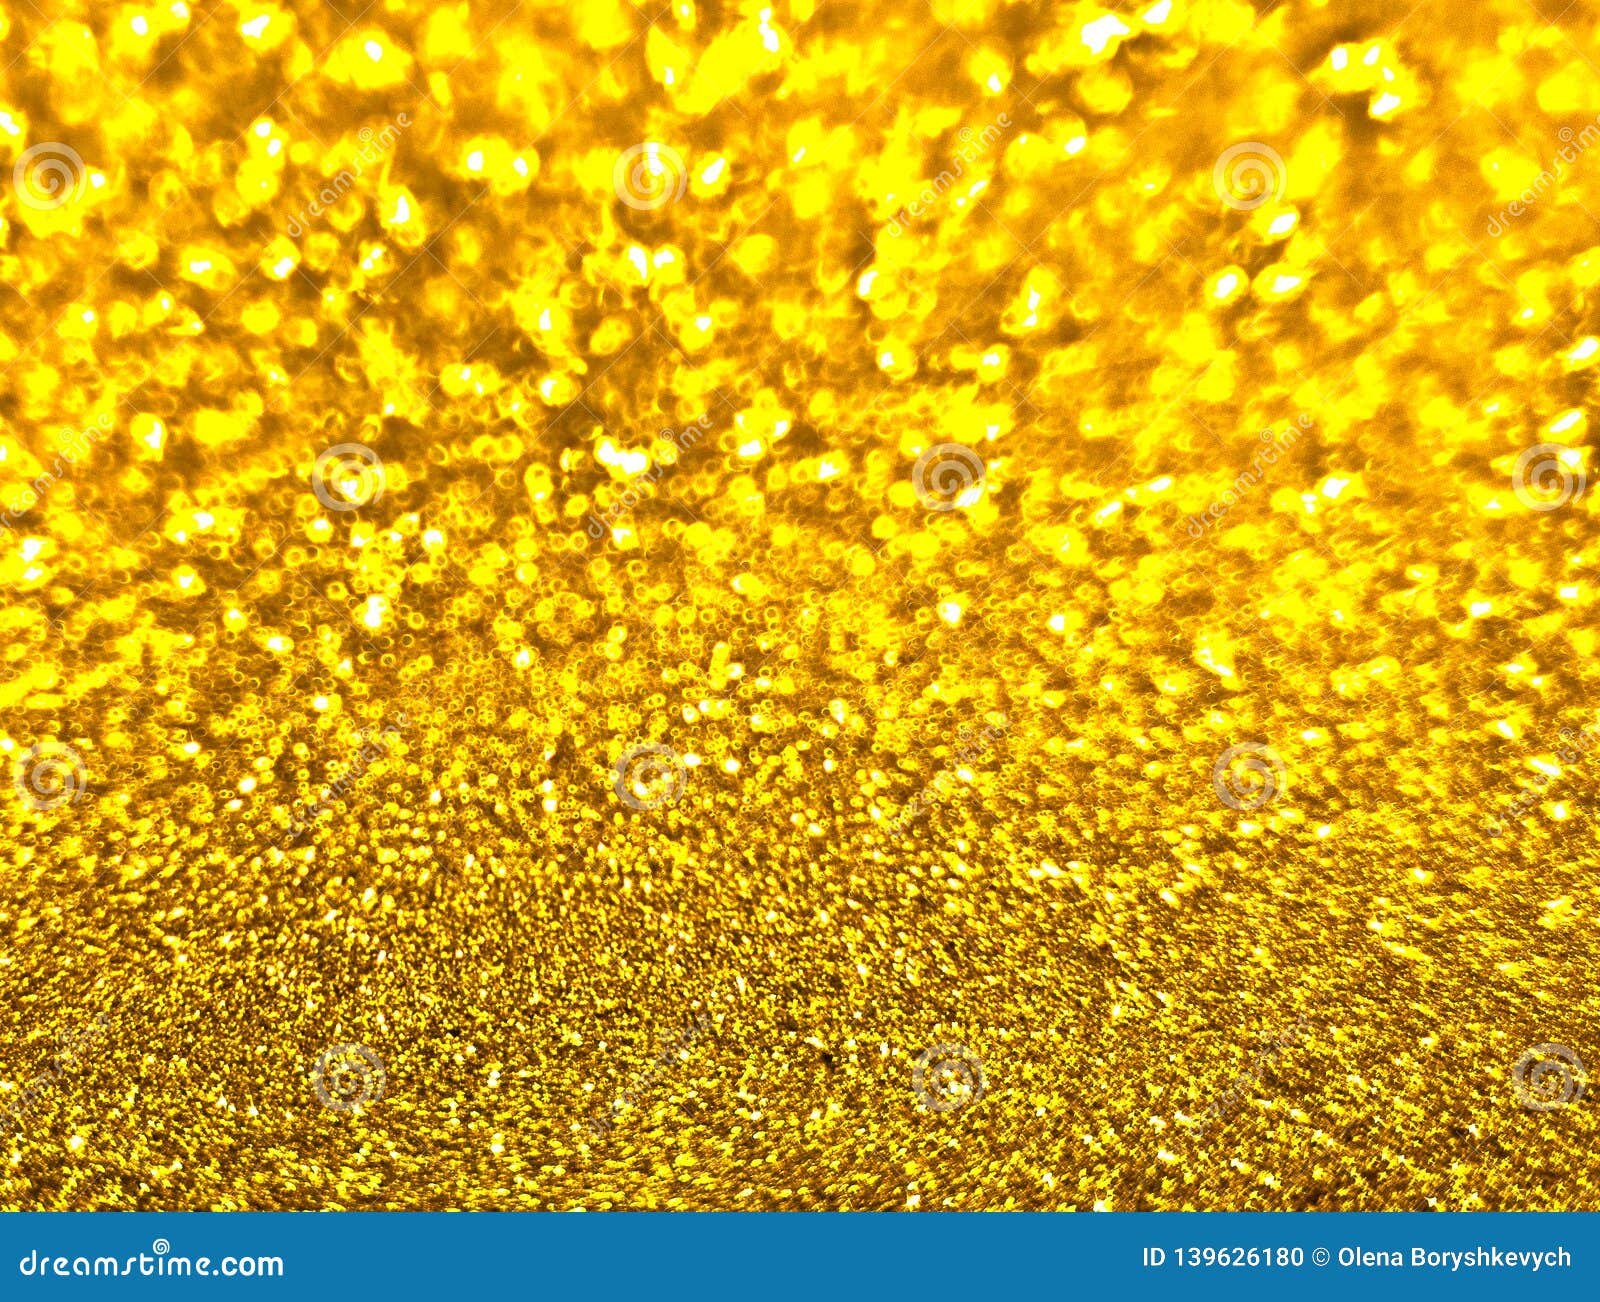 The Unfocused Golden Background with Shine. Stock Photo - Image of poster,  bright: 139626180